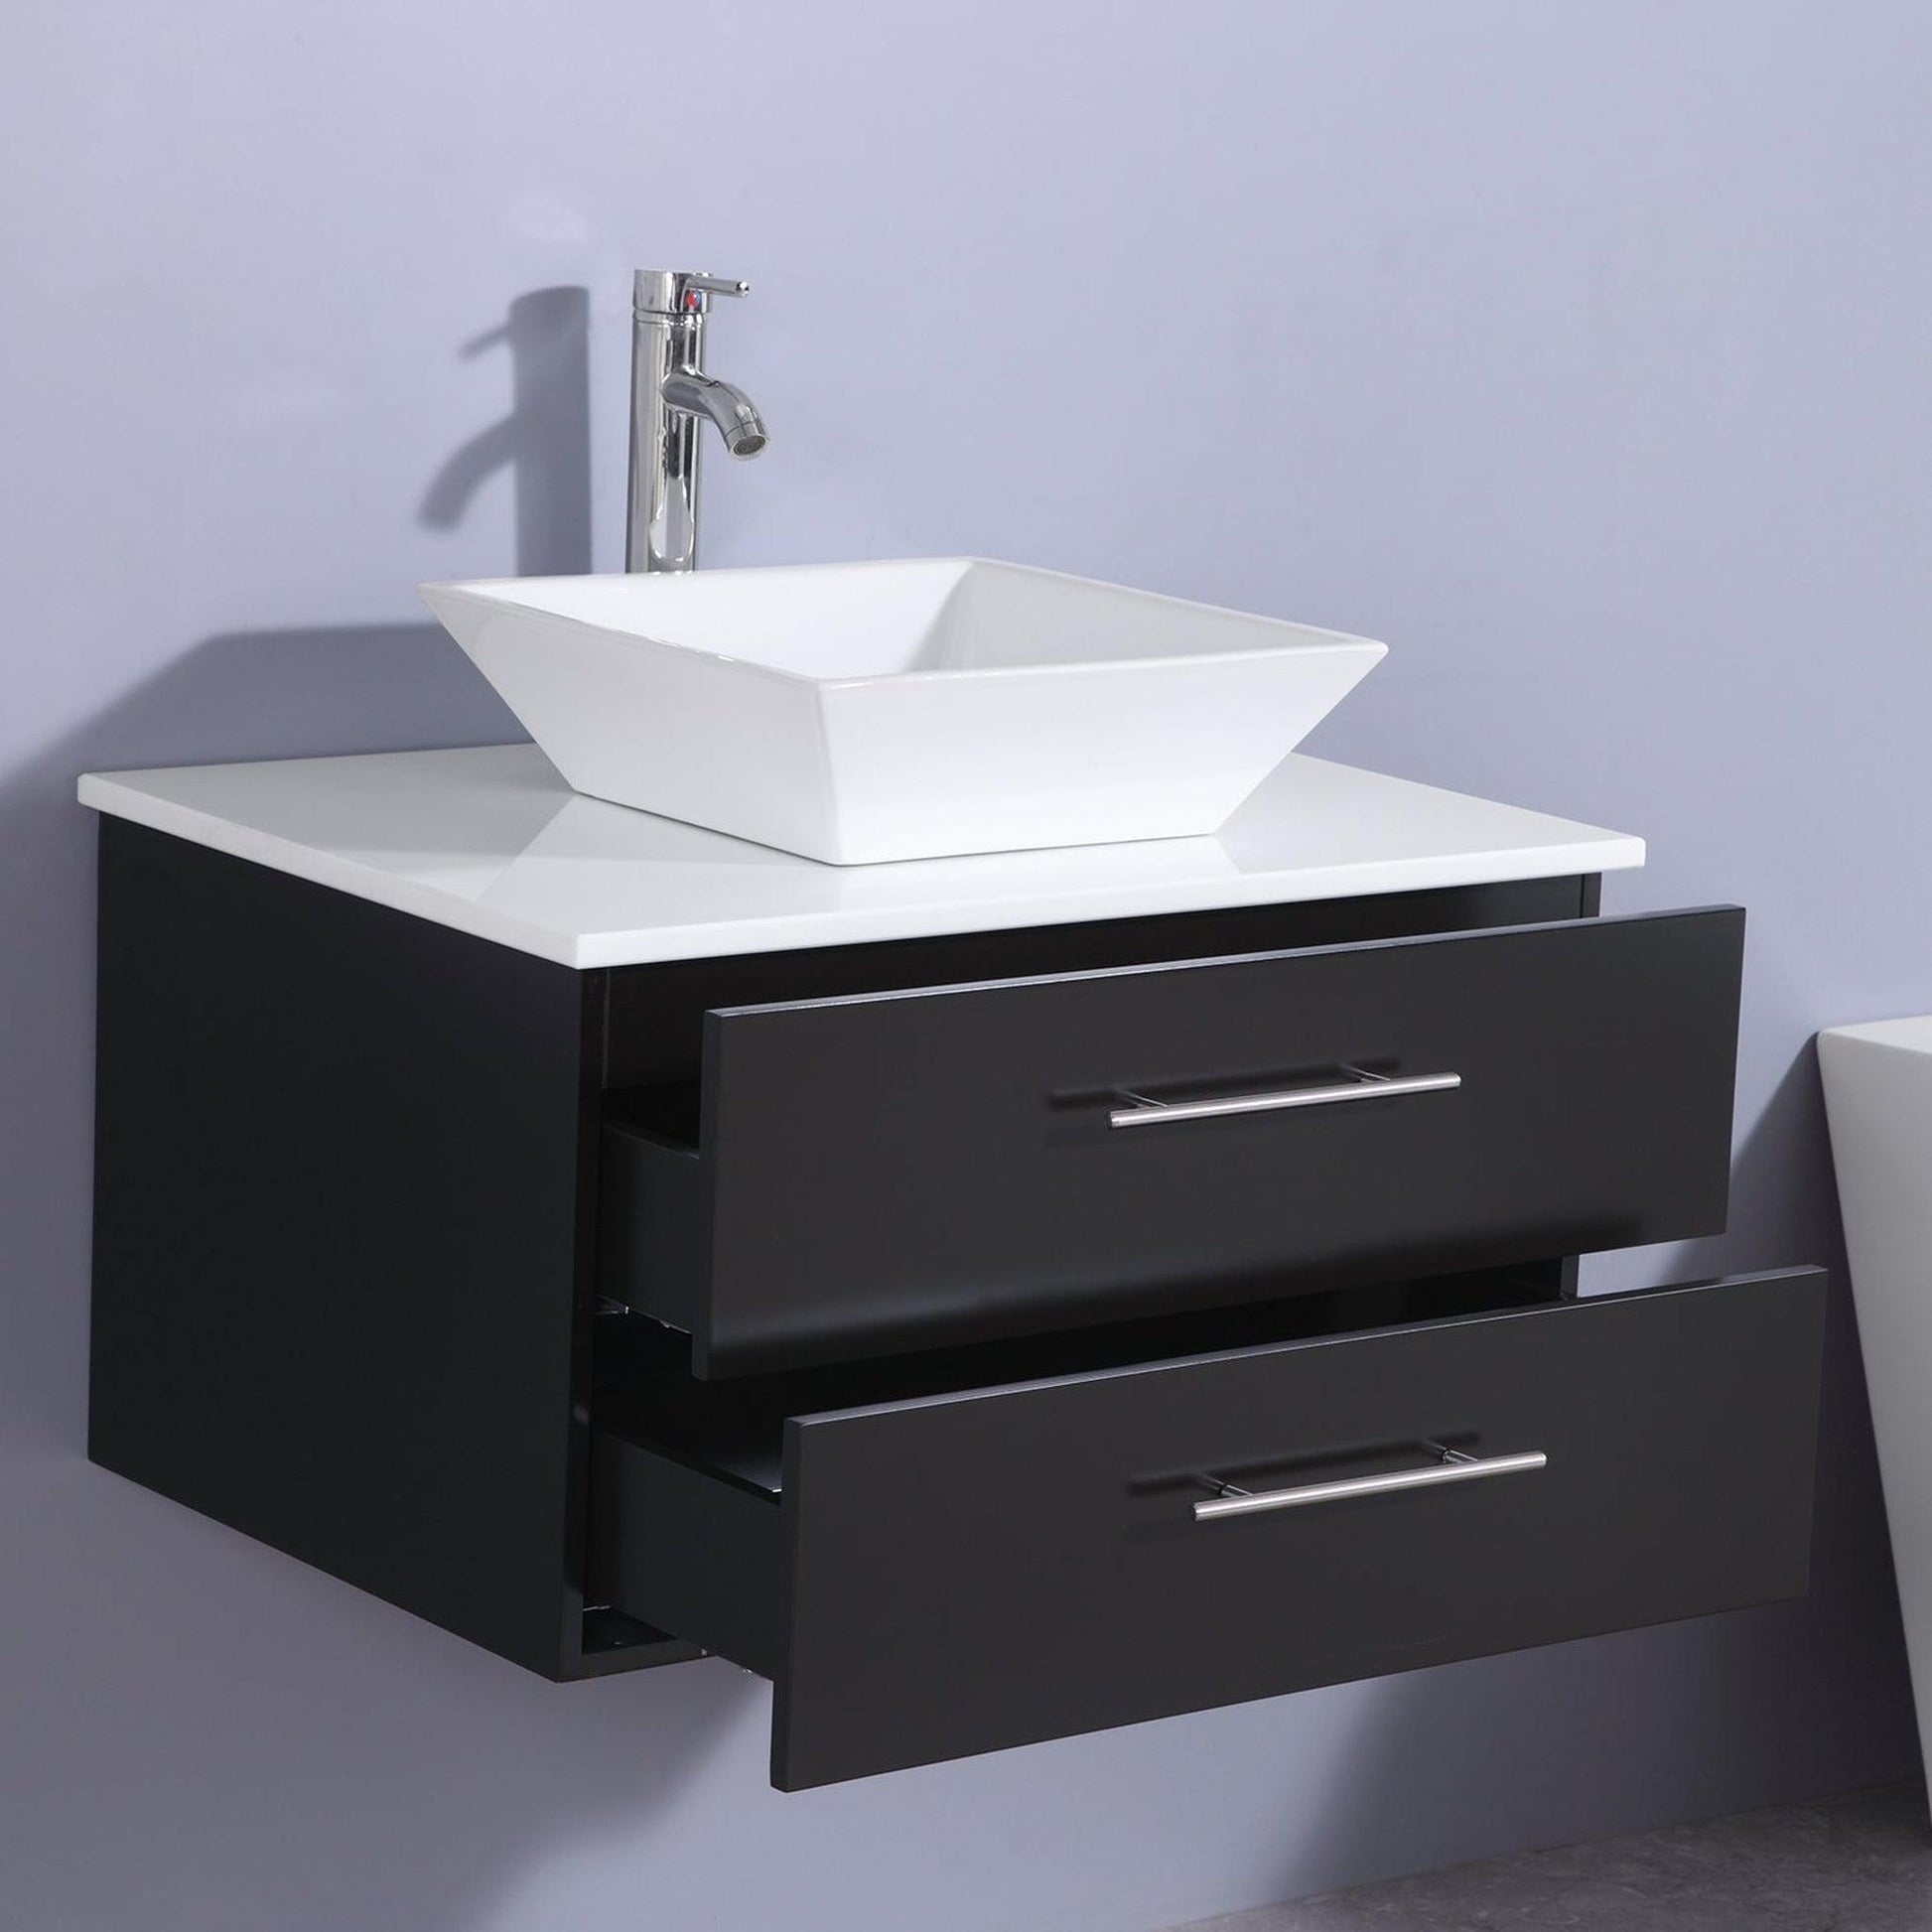 Eviva Totti Wave 24" x 16" Espresso Wall-Mounted Bathroom Vanity With White Man-Made Stone Countertop and Single Porcelain Sink